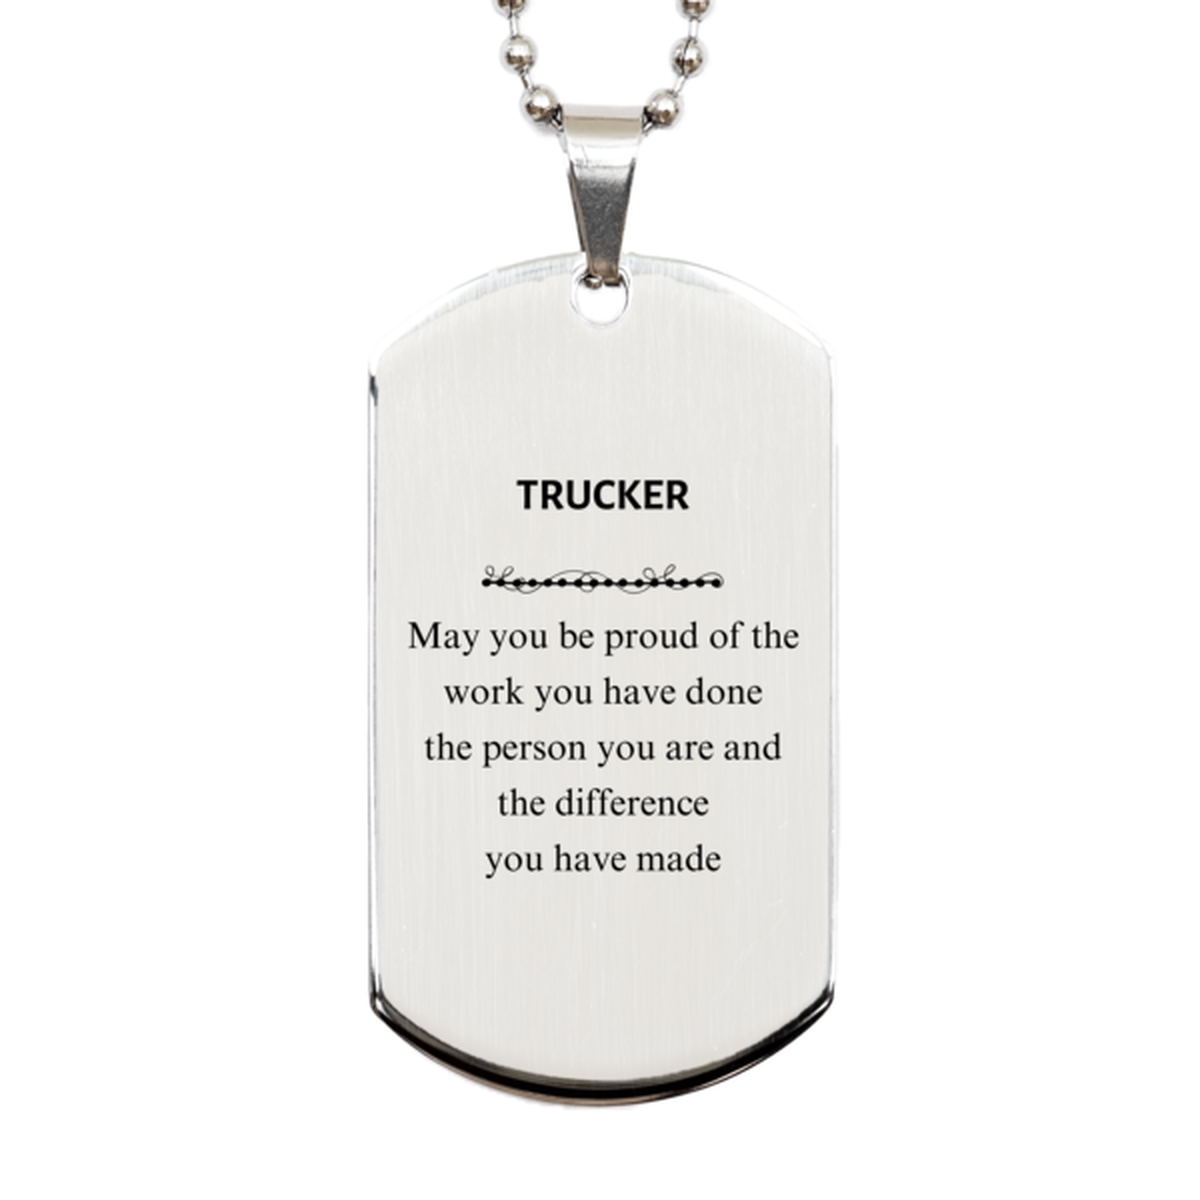 Trucker May you be proud of the work you have done, Retirement Trucker Silver Dog Tag for Colleague Appreciation Gifts Amazing for Trucker